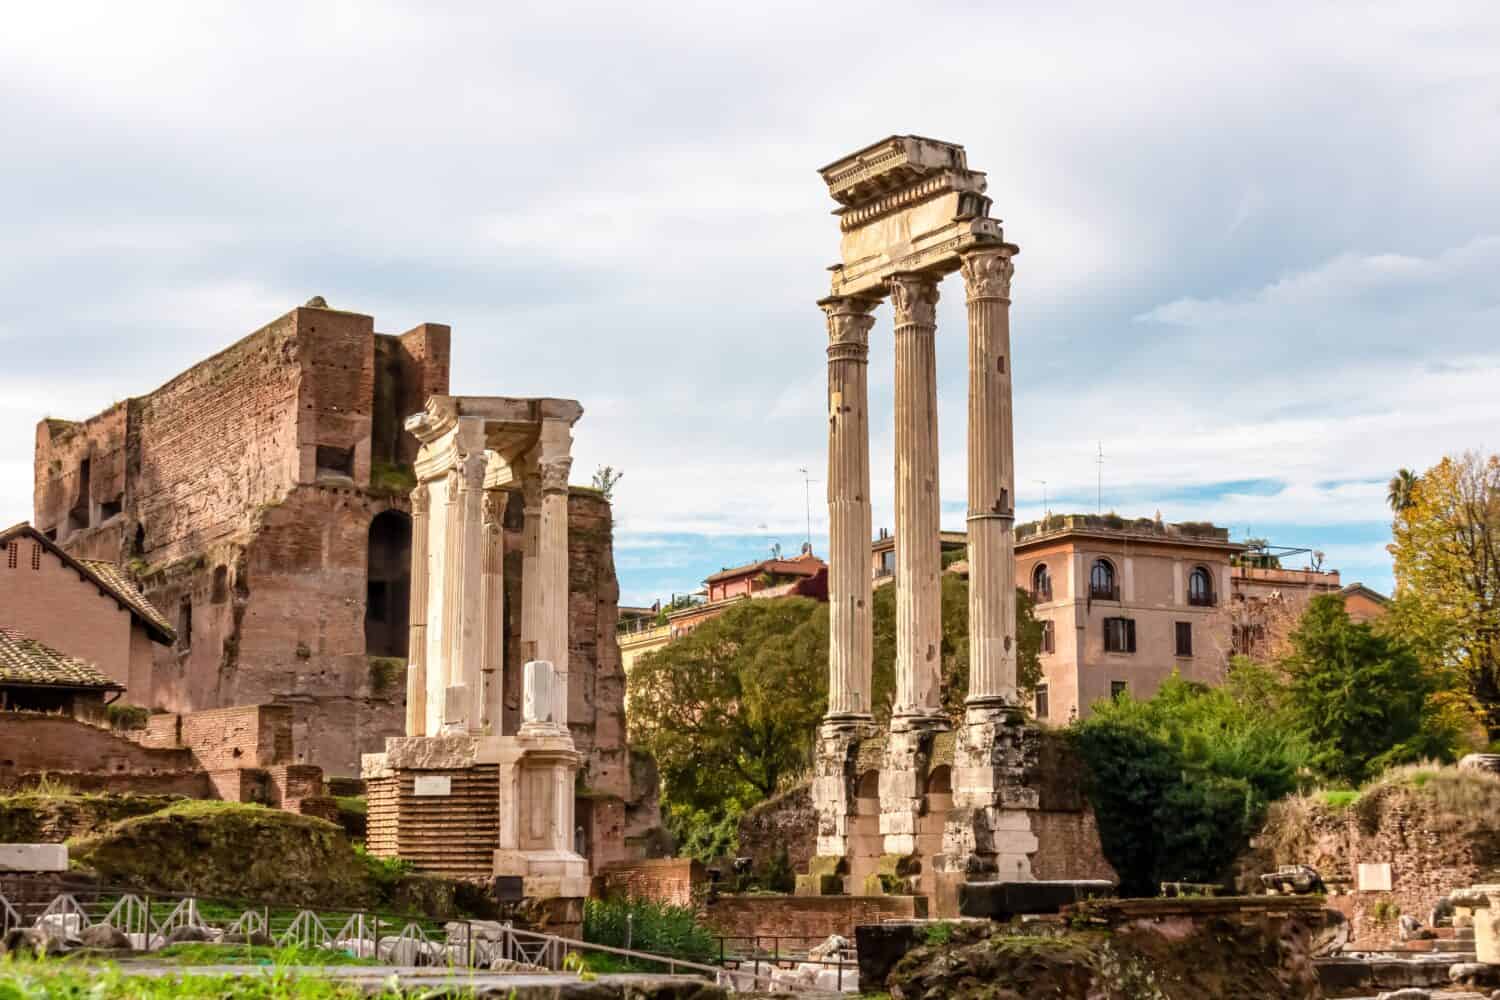 Panoramic close up view of the Temple of Castor and Pollux in the Roman Forum (Foro Romano) in the city of Rome, Lazio, Italy, EU Europe. Ancient ruins of the Roman Temple on Via Sacra. Culture trip